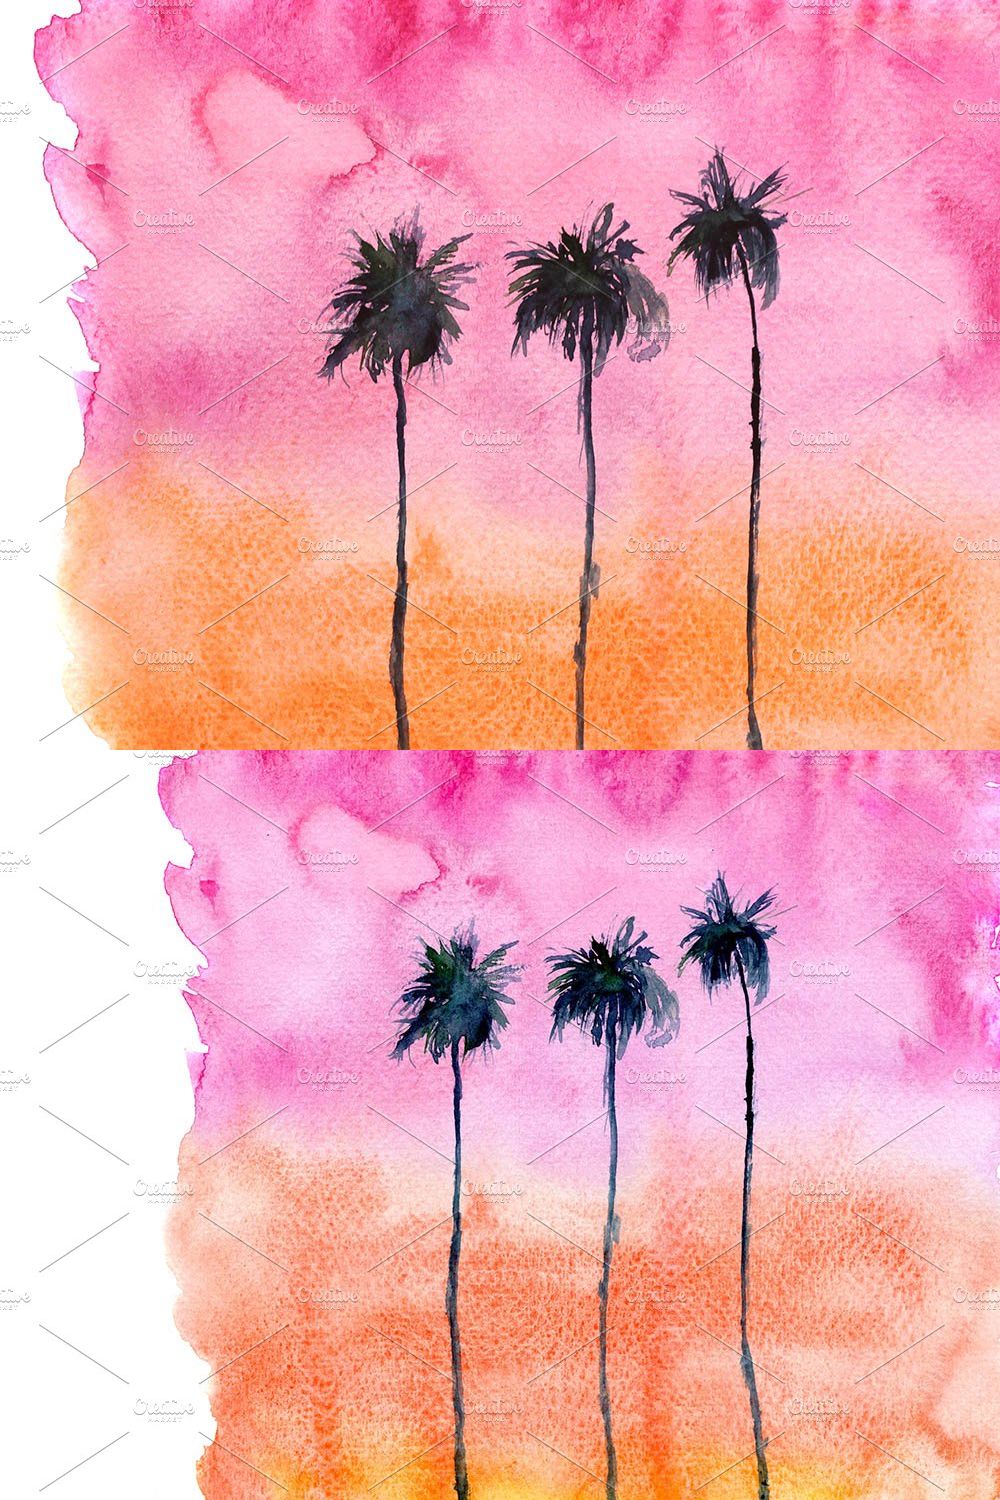 Watercolor sunset with palms pinterest preview image.